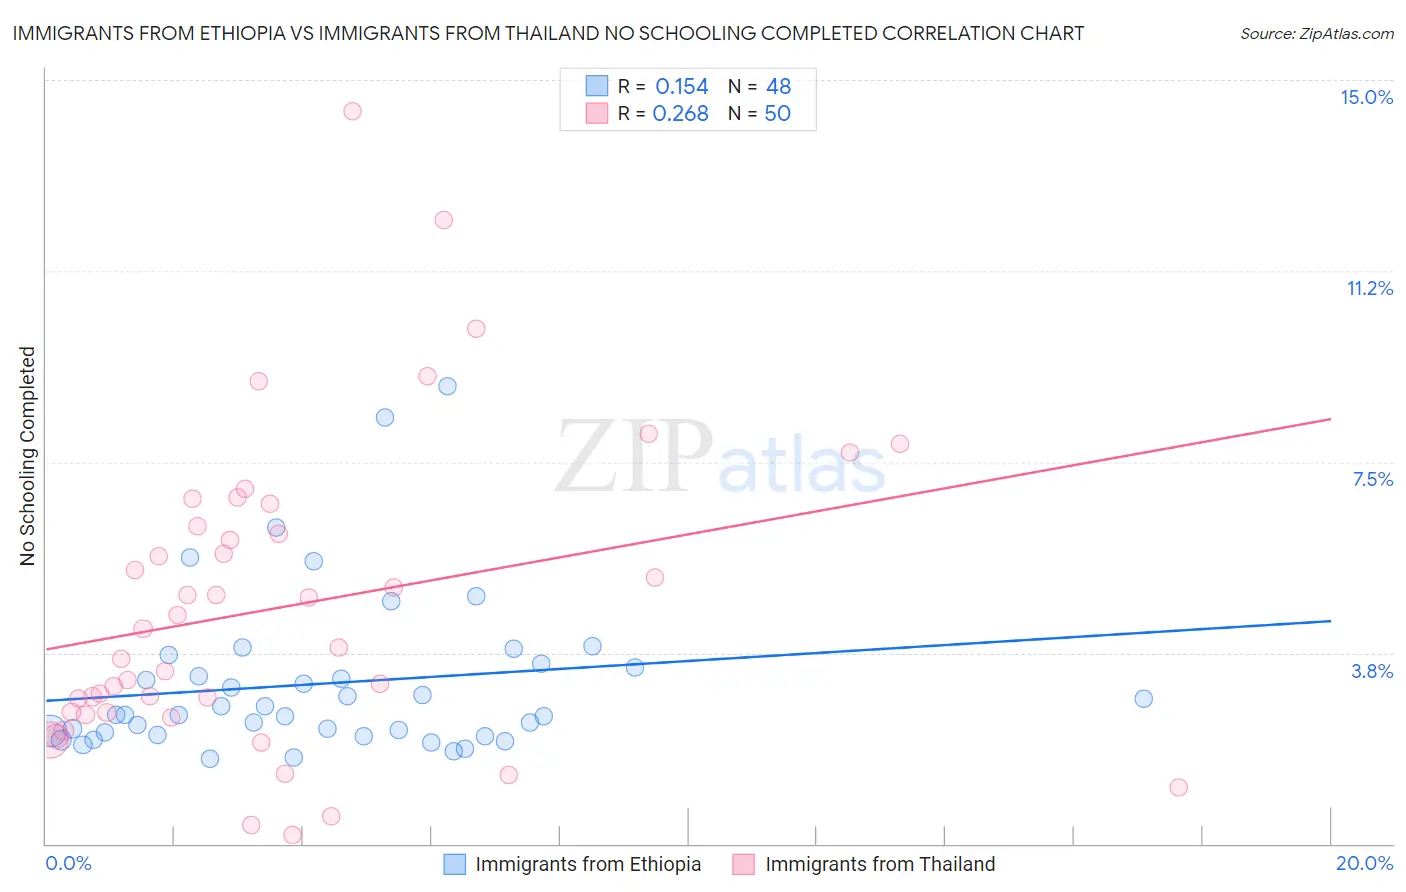 Immigrants from Ethiopia vs Immigrants from Thailand No Schooling Completed